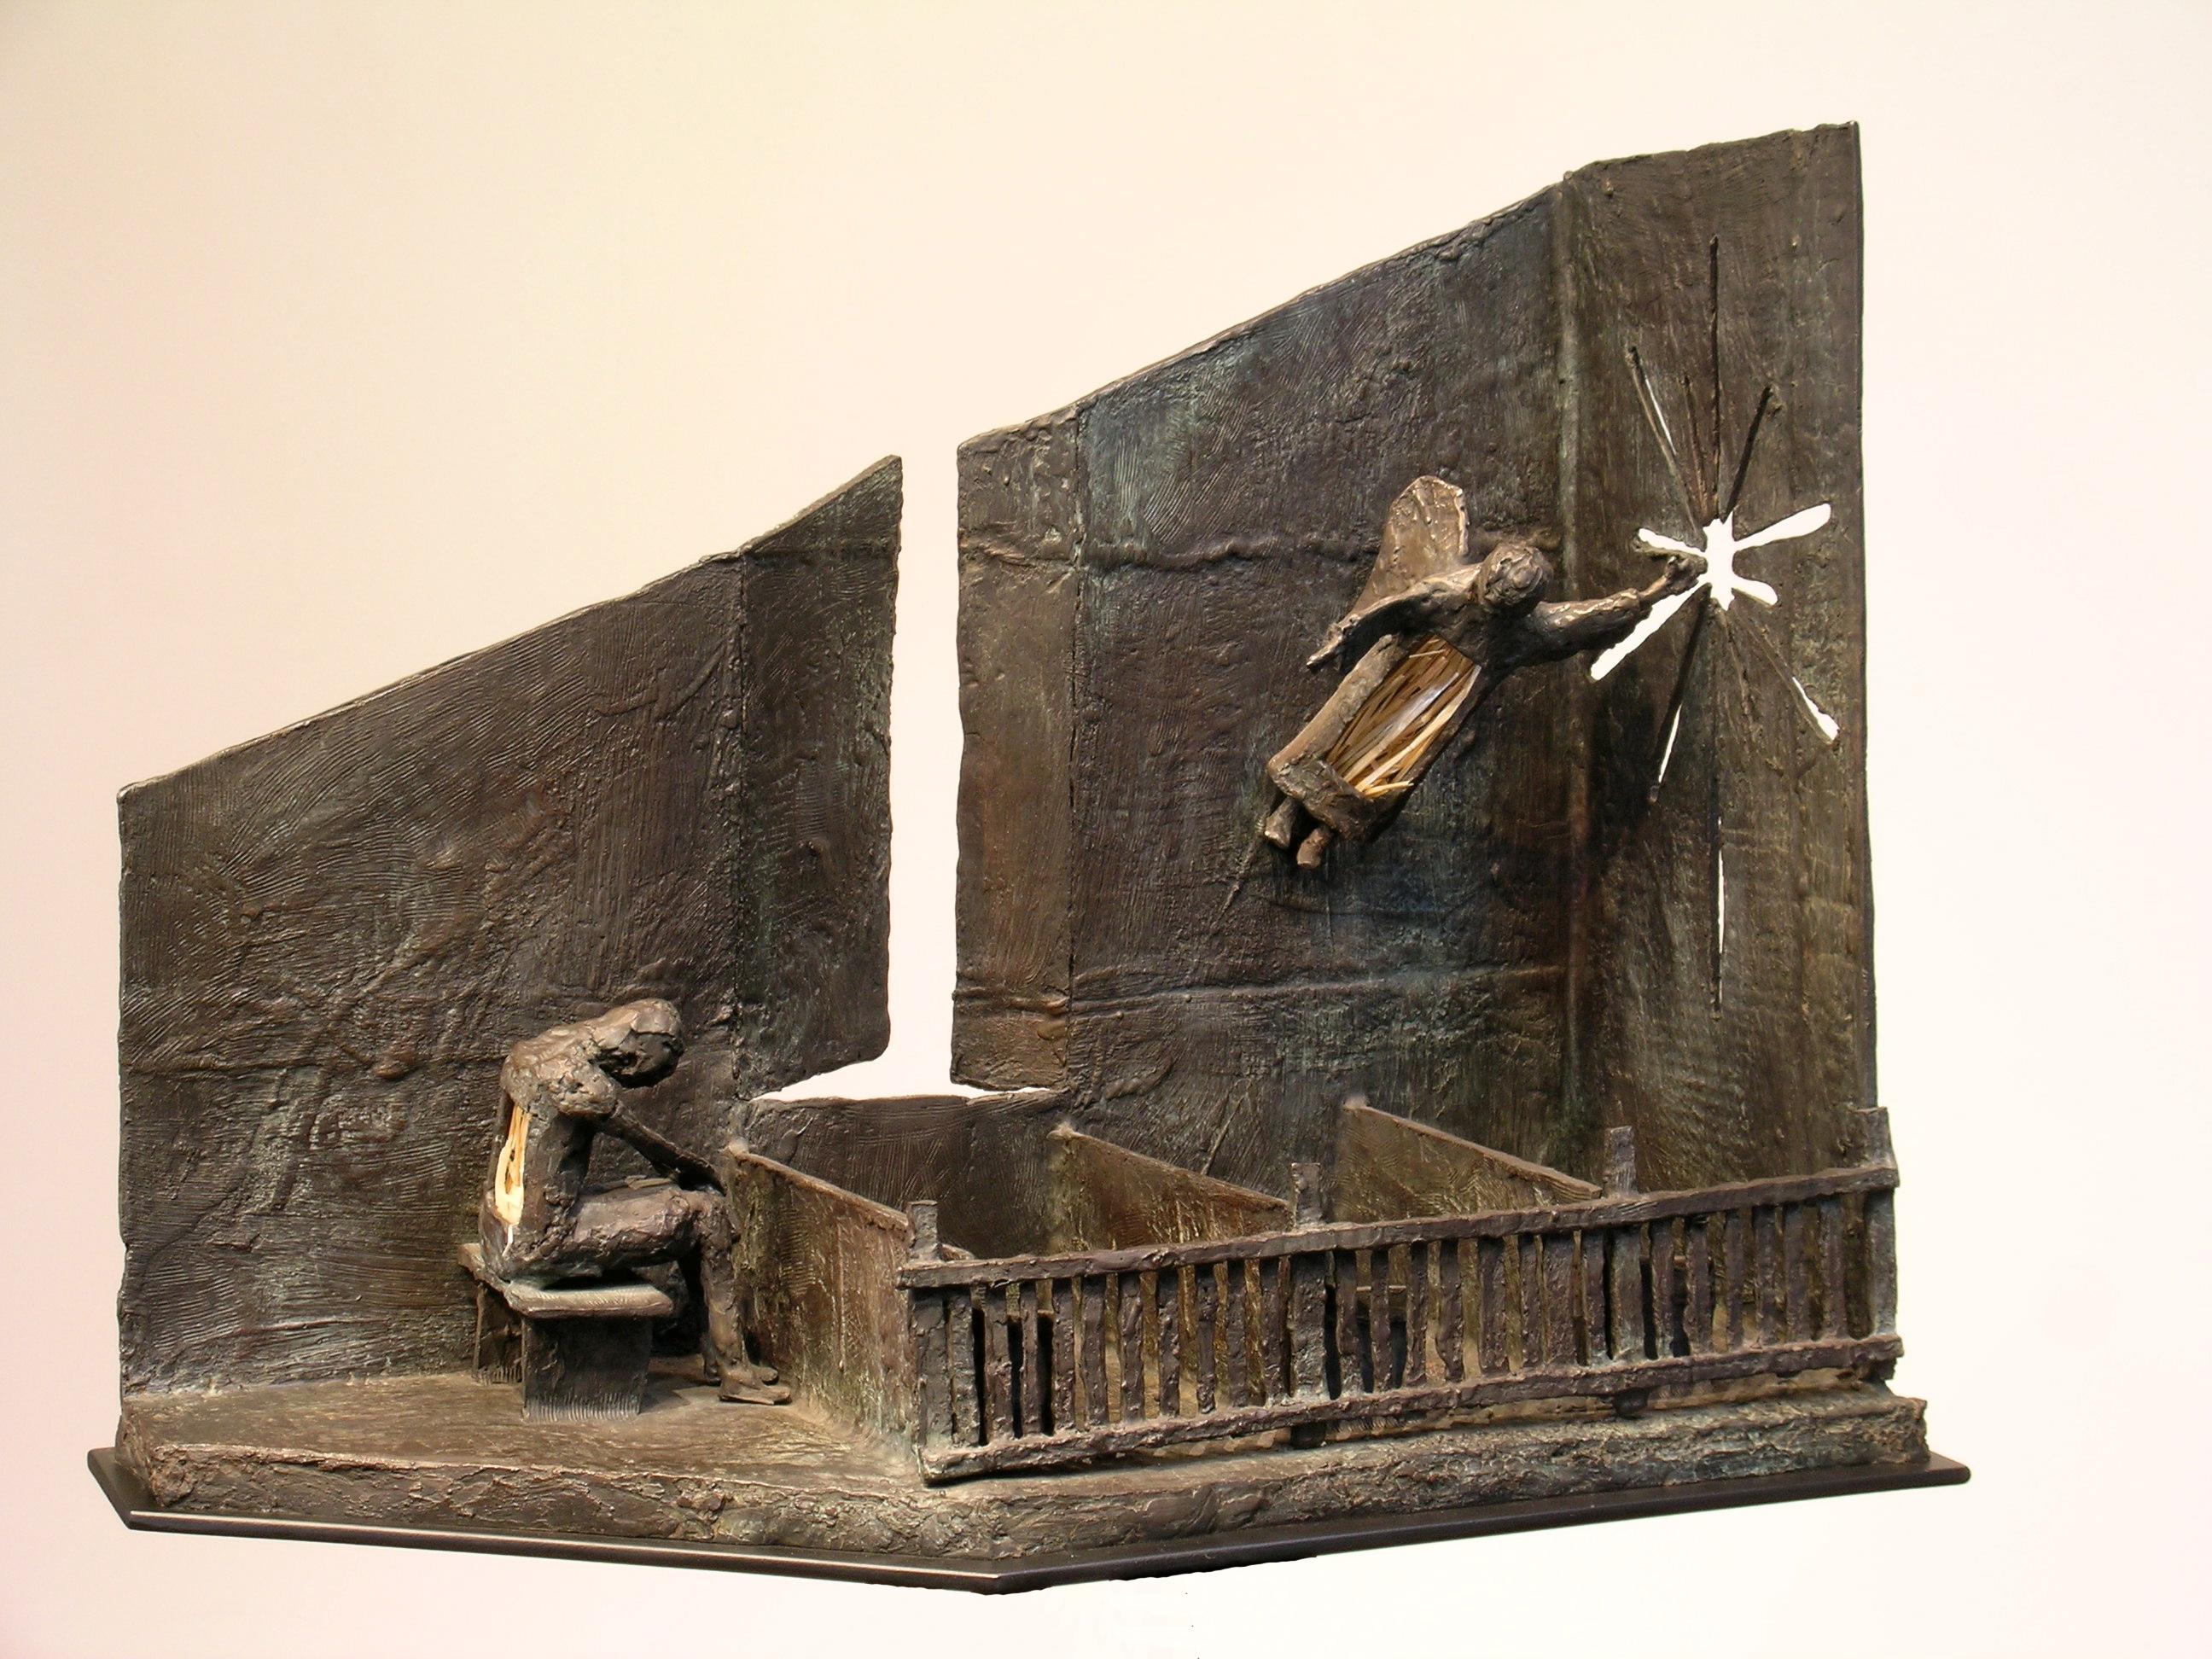 Contemplating the Angel by Eduardo Oropeza, bronze sculpture, angel, church
limited edition of 25 bronze and straw/twigs

Sculptor, painter, printmaker, & photographer, Eduardo Oropeza remains a commanding presence in contemporary art. He applied a